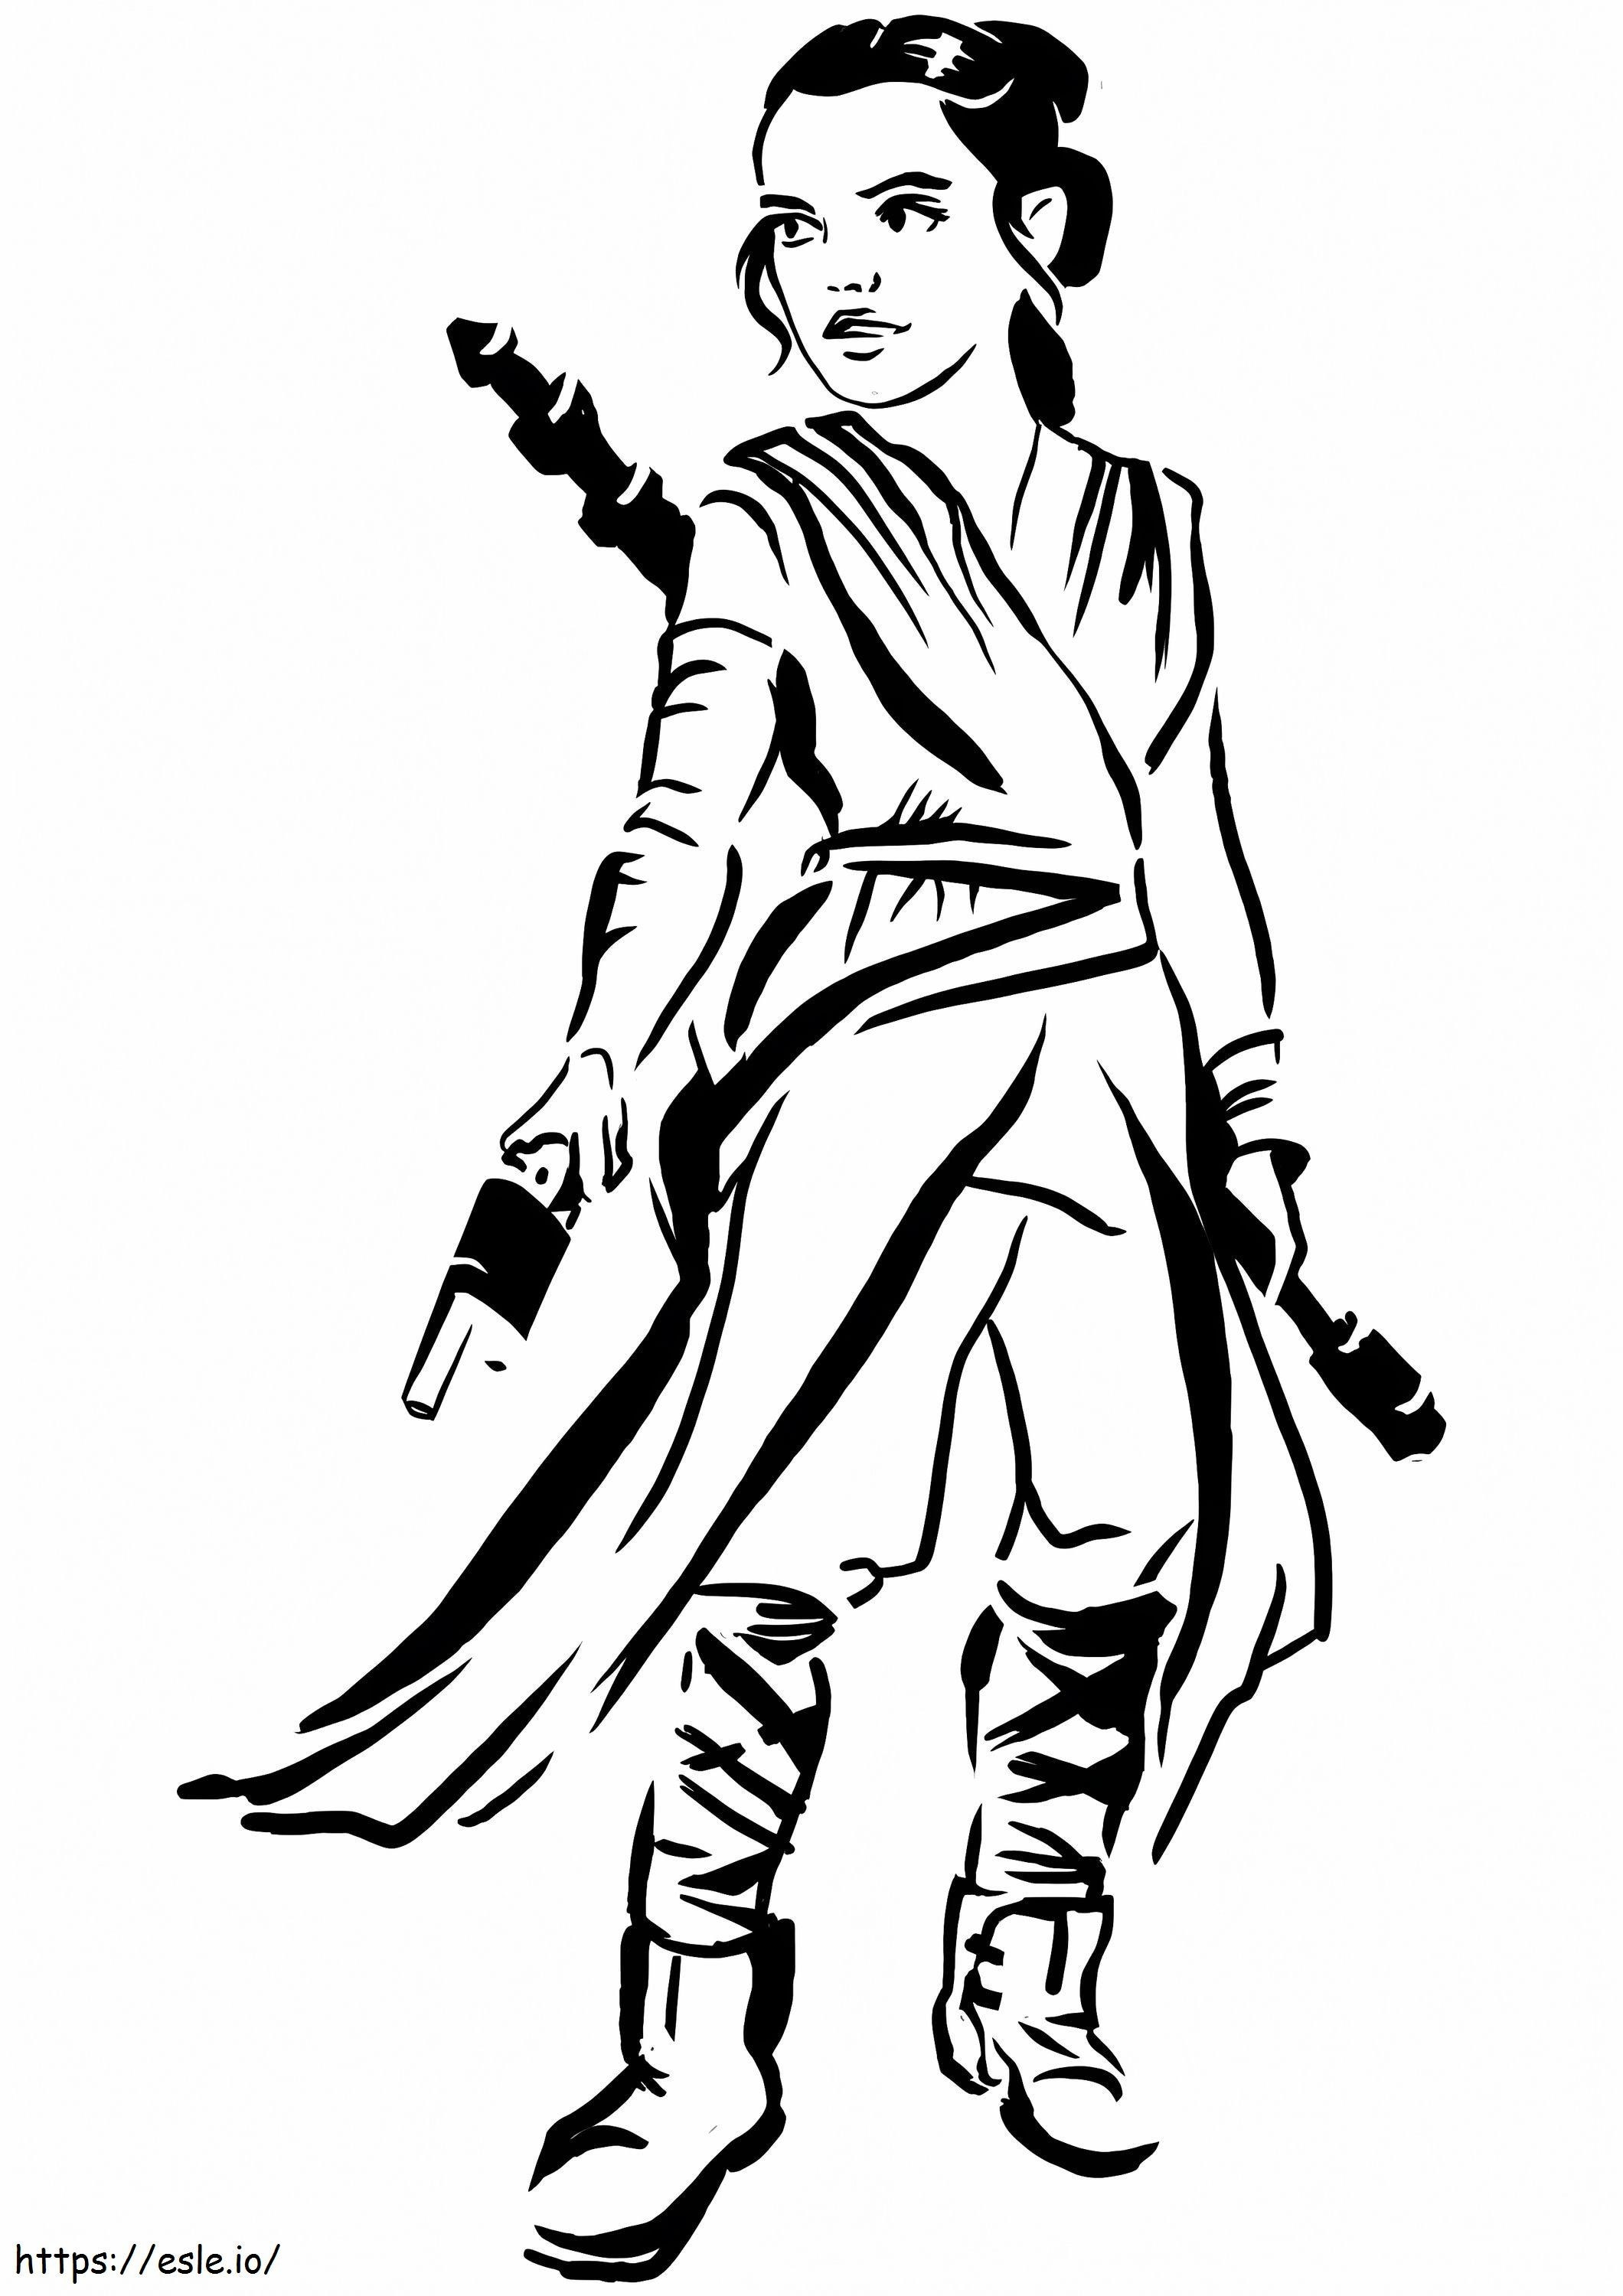 Rey From Star Wars coloring page